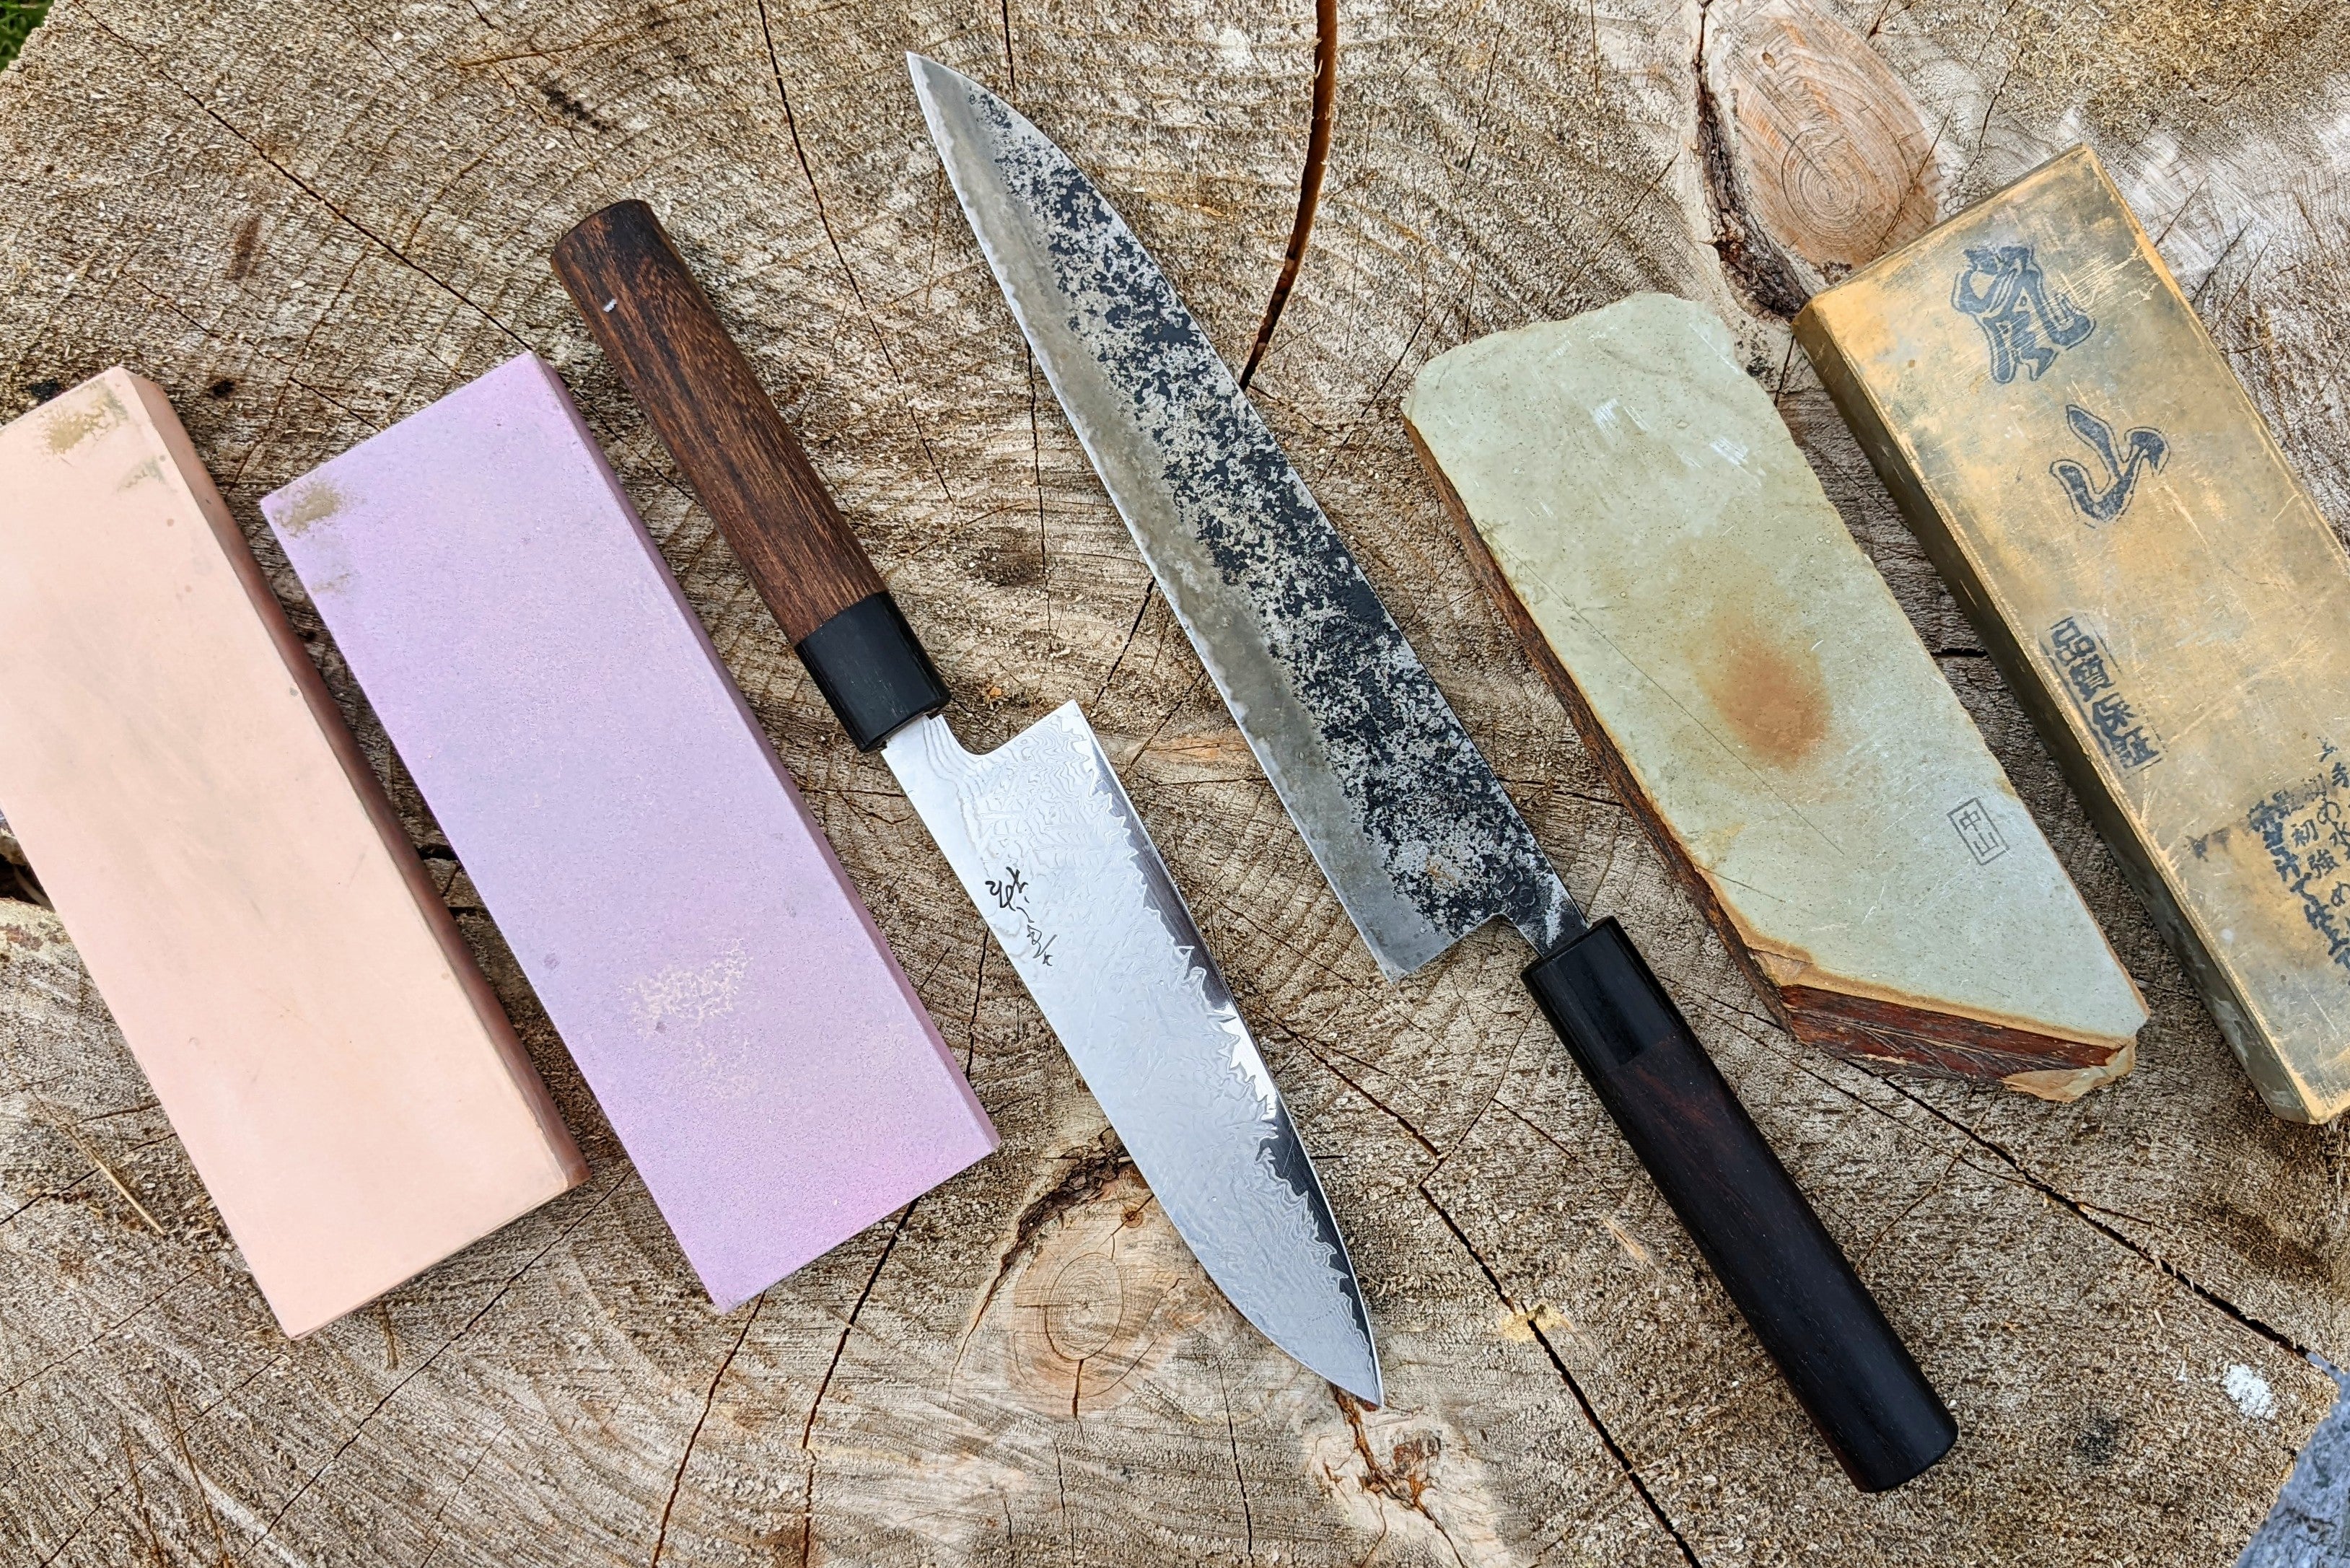 How to choose the right sharpening steel?